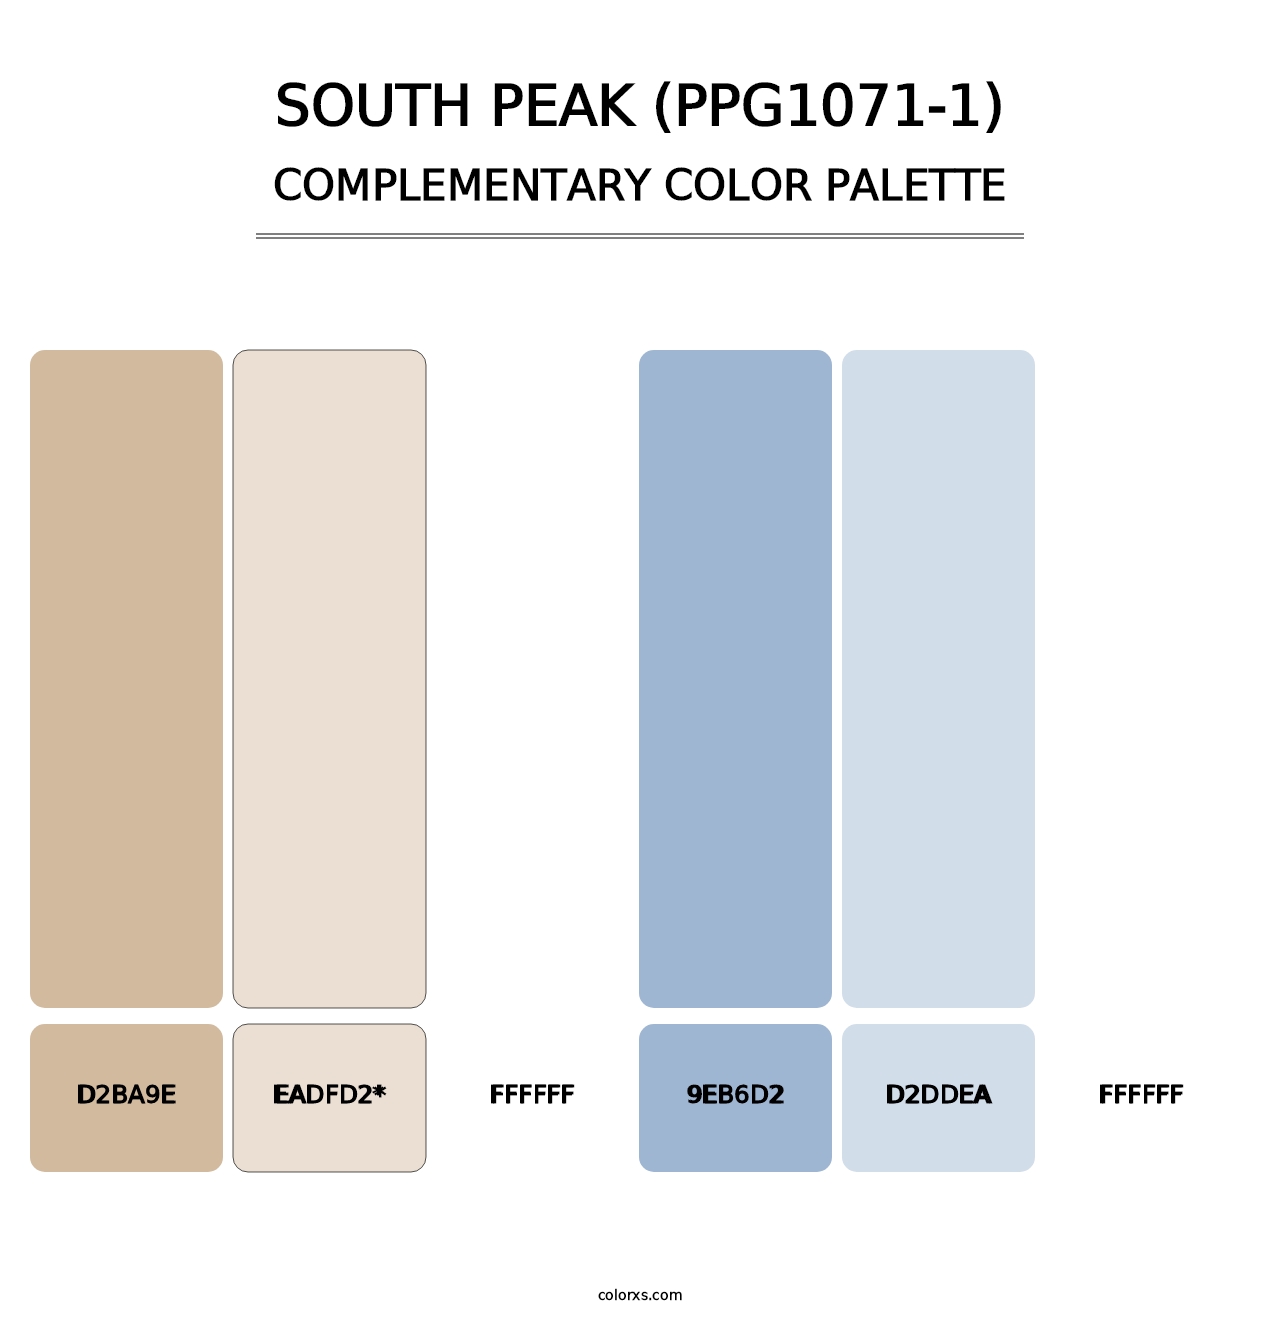 South Peak (PPG1071-1) - Complementary Color Palette